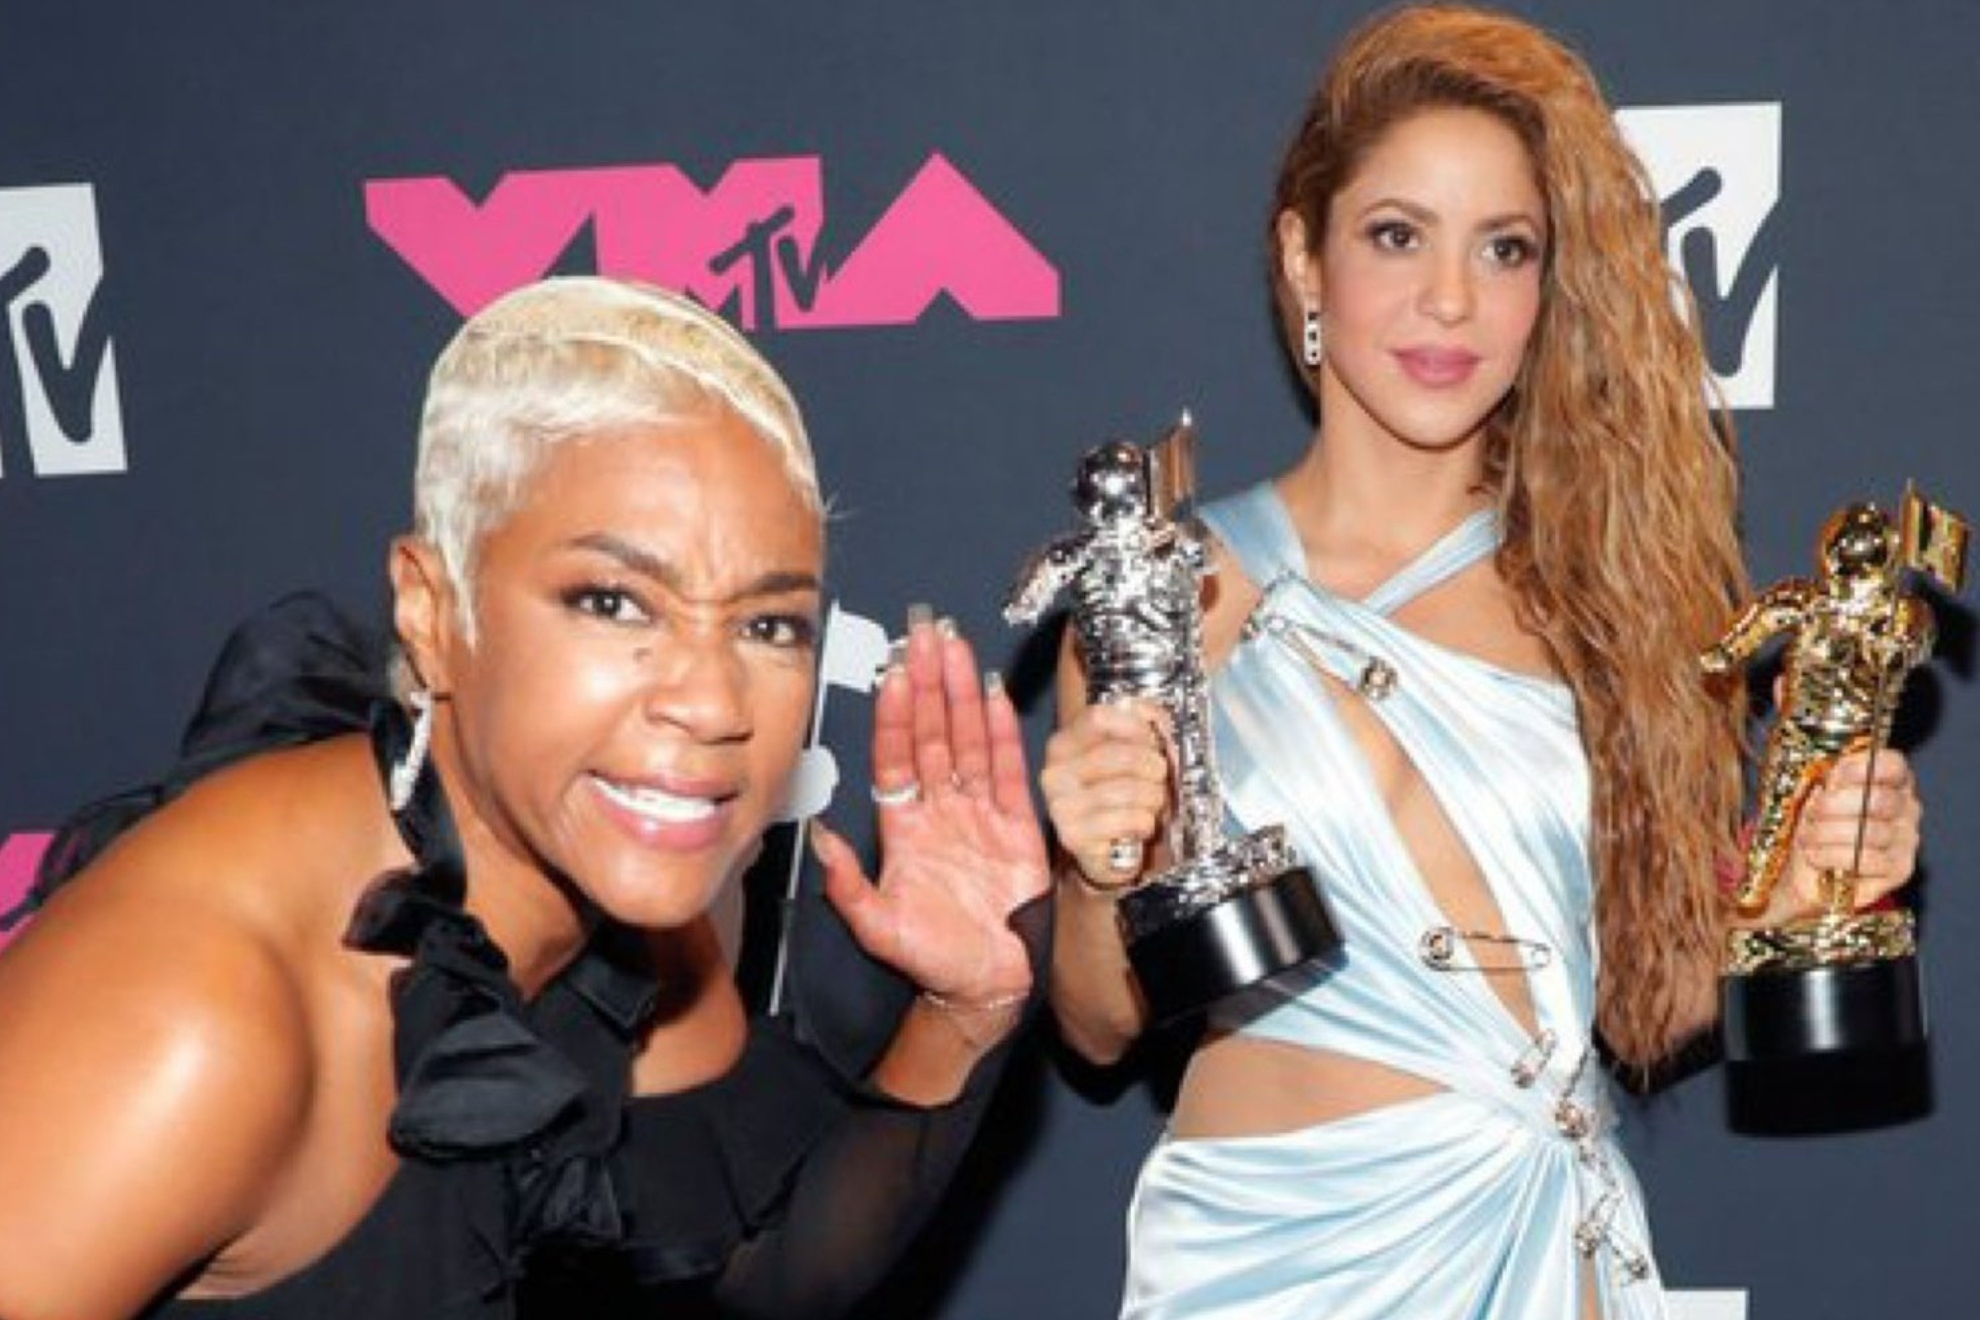 Tiffany Haddish claps back at haters who roasted her for photobombing Shakira at the VMAs